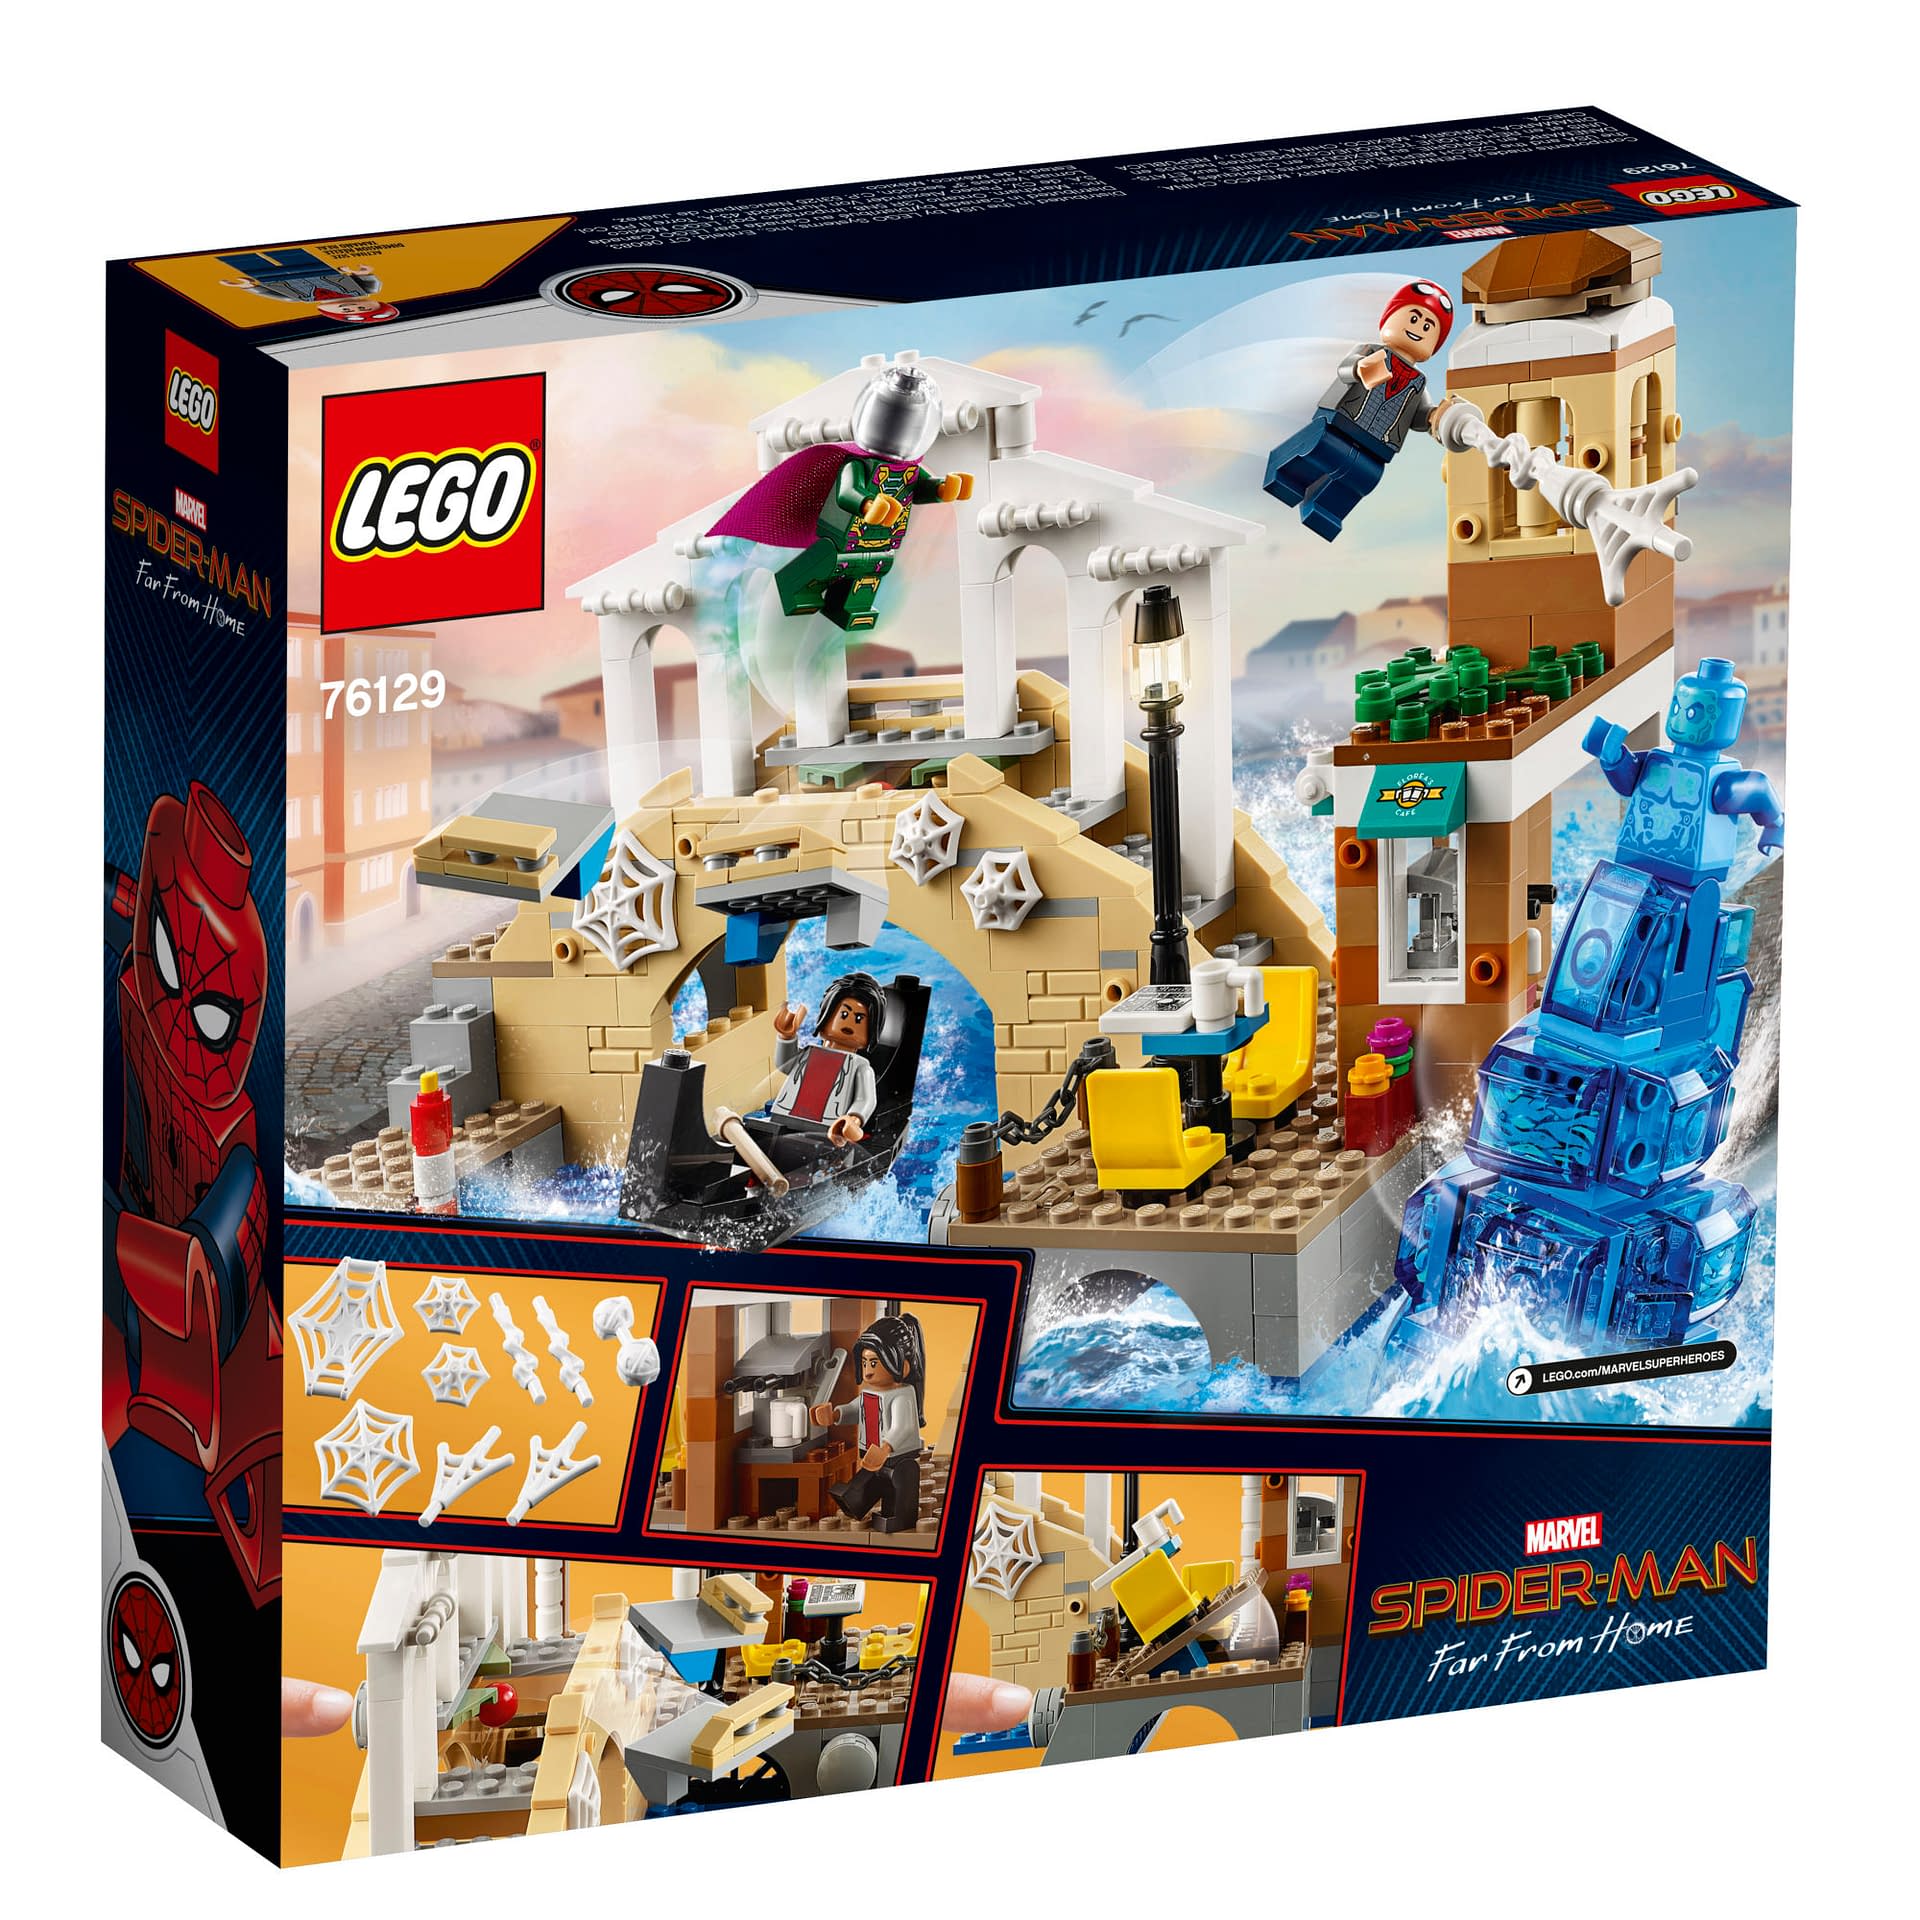 Three New Awesome Spider-Man: Far From Home LEGO Sets Coming Soon